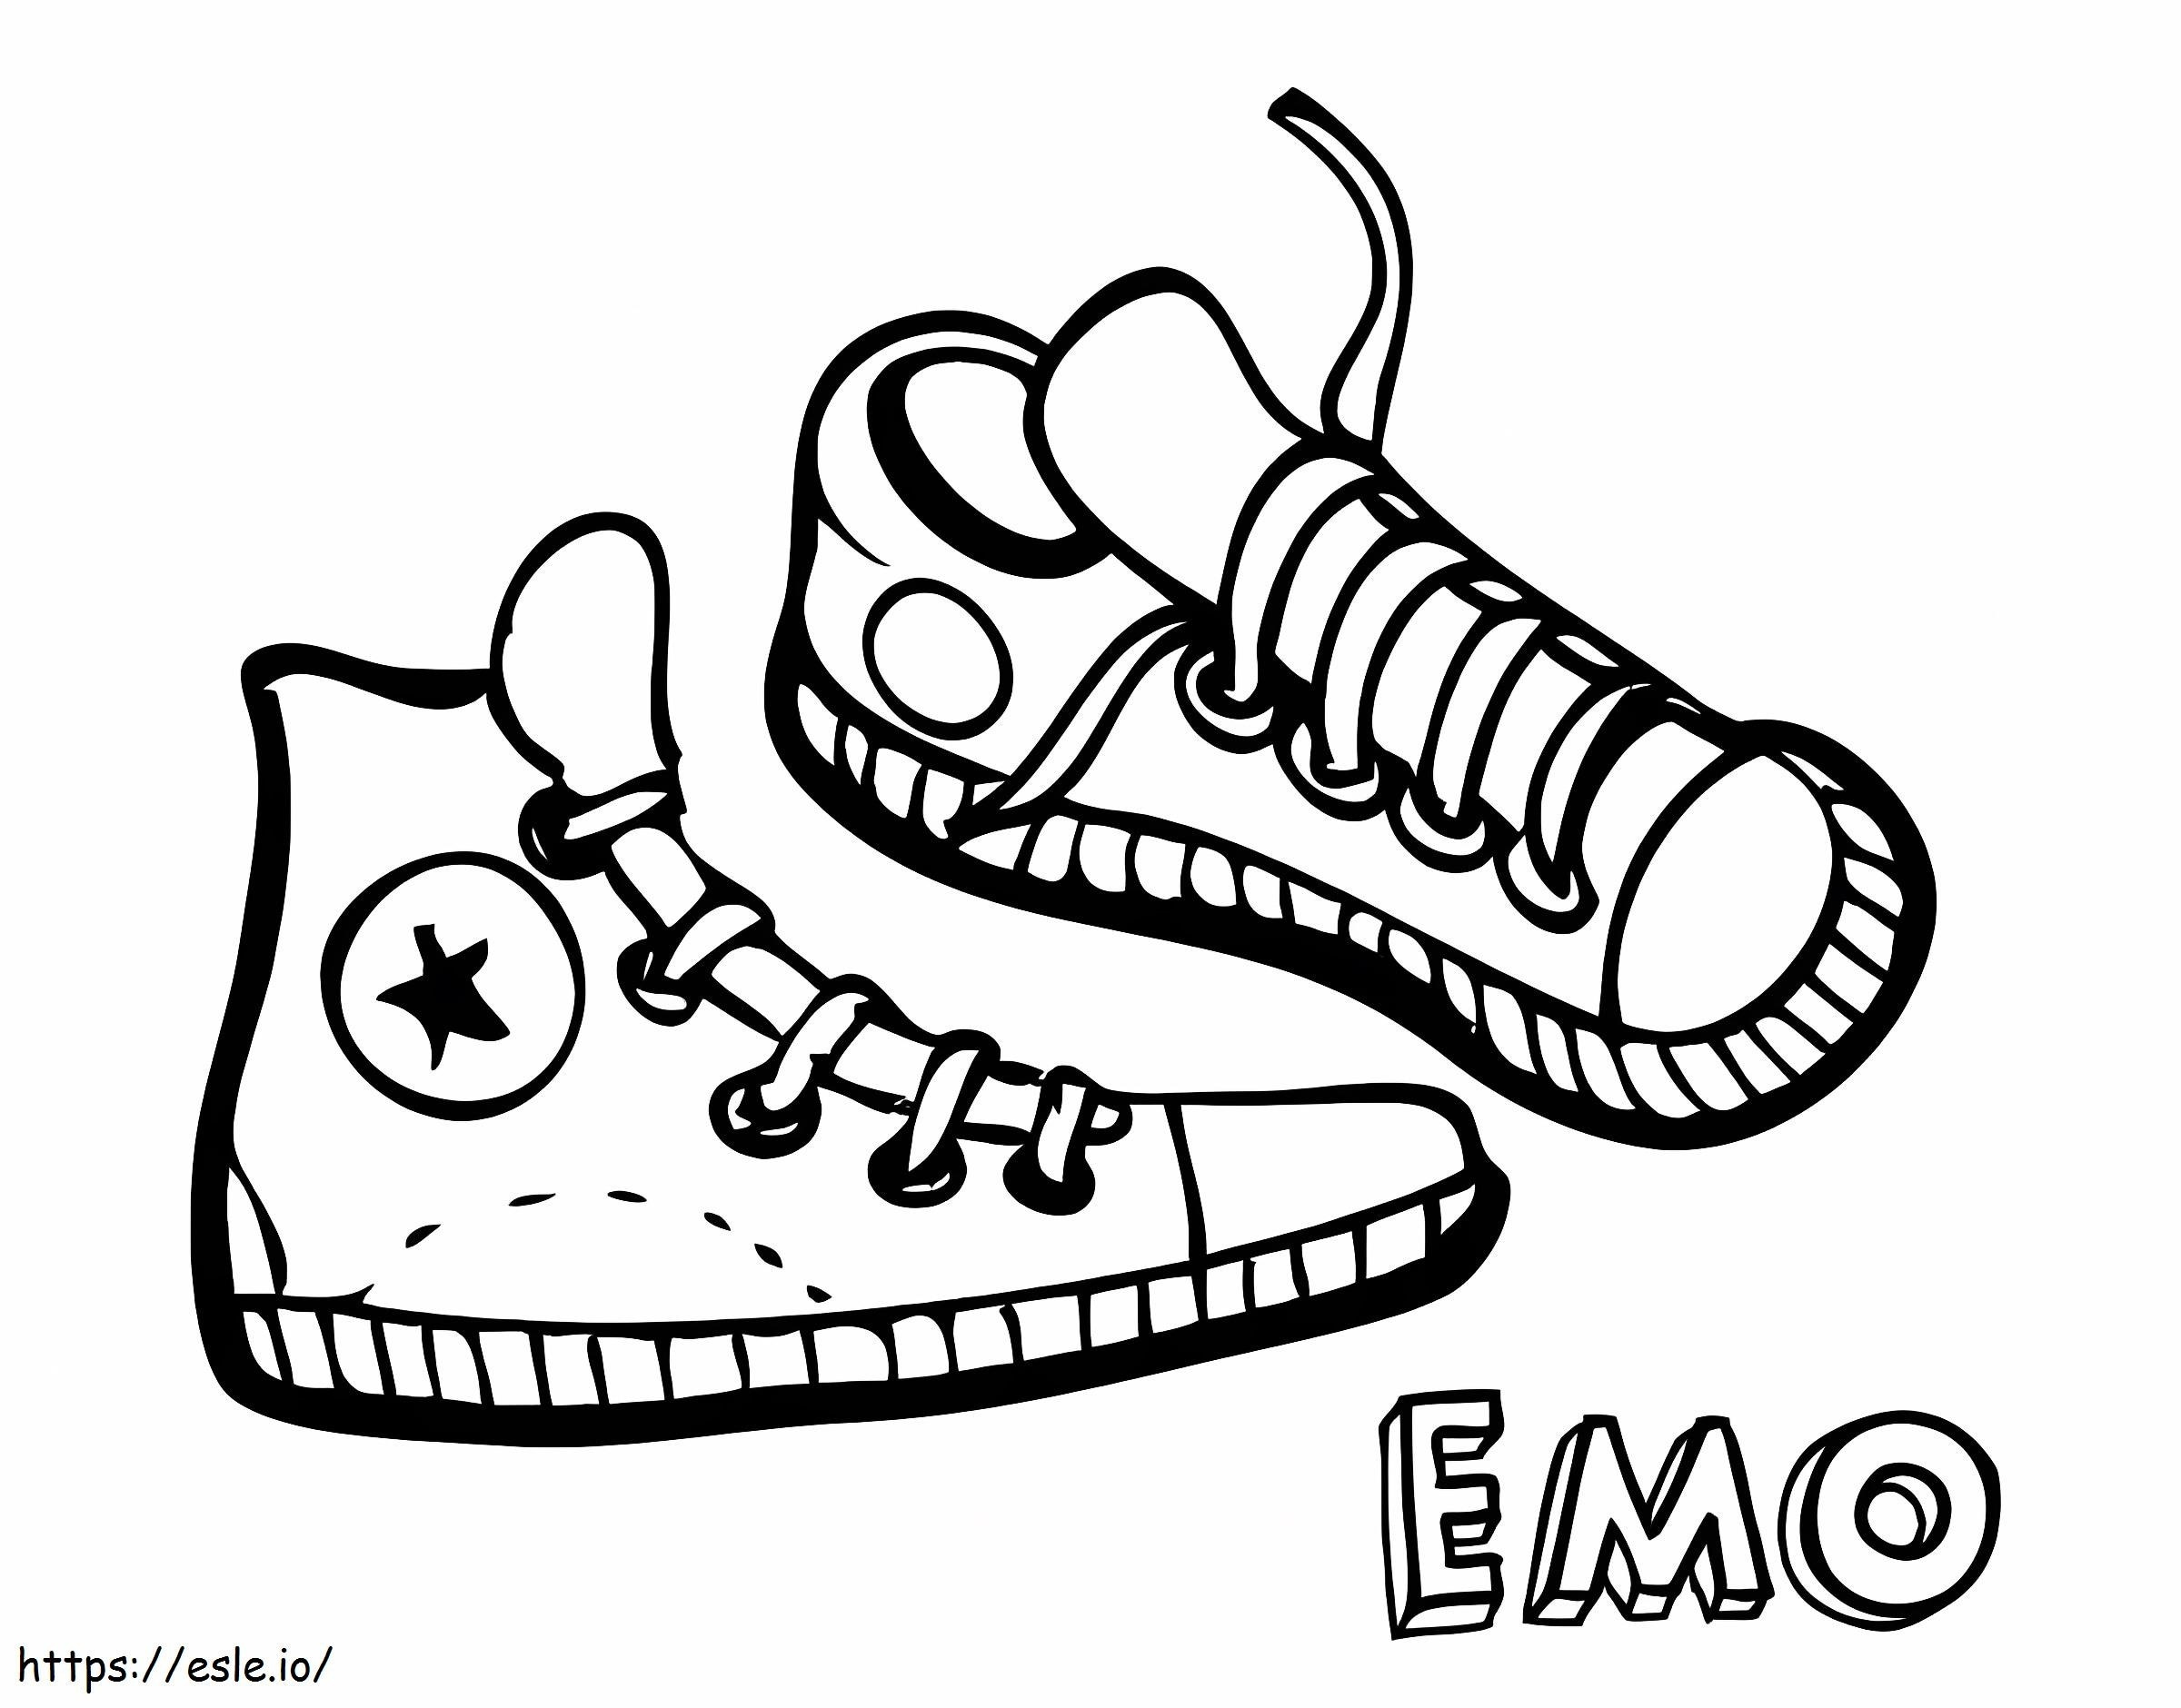 Emo Sneakers coloring page